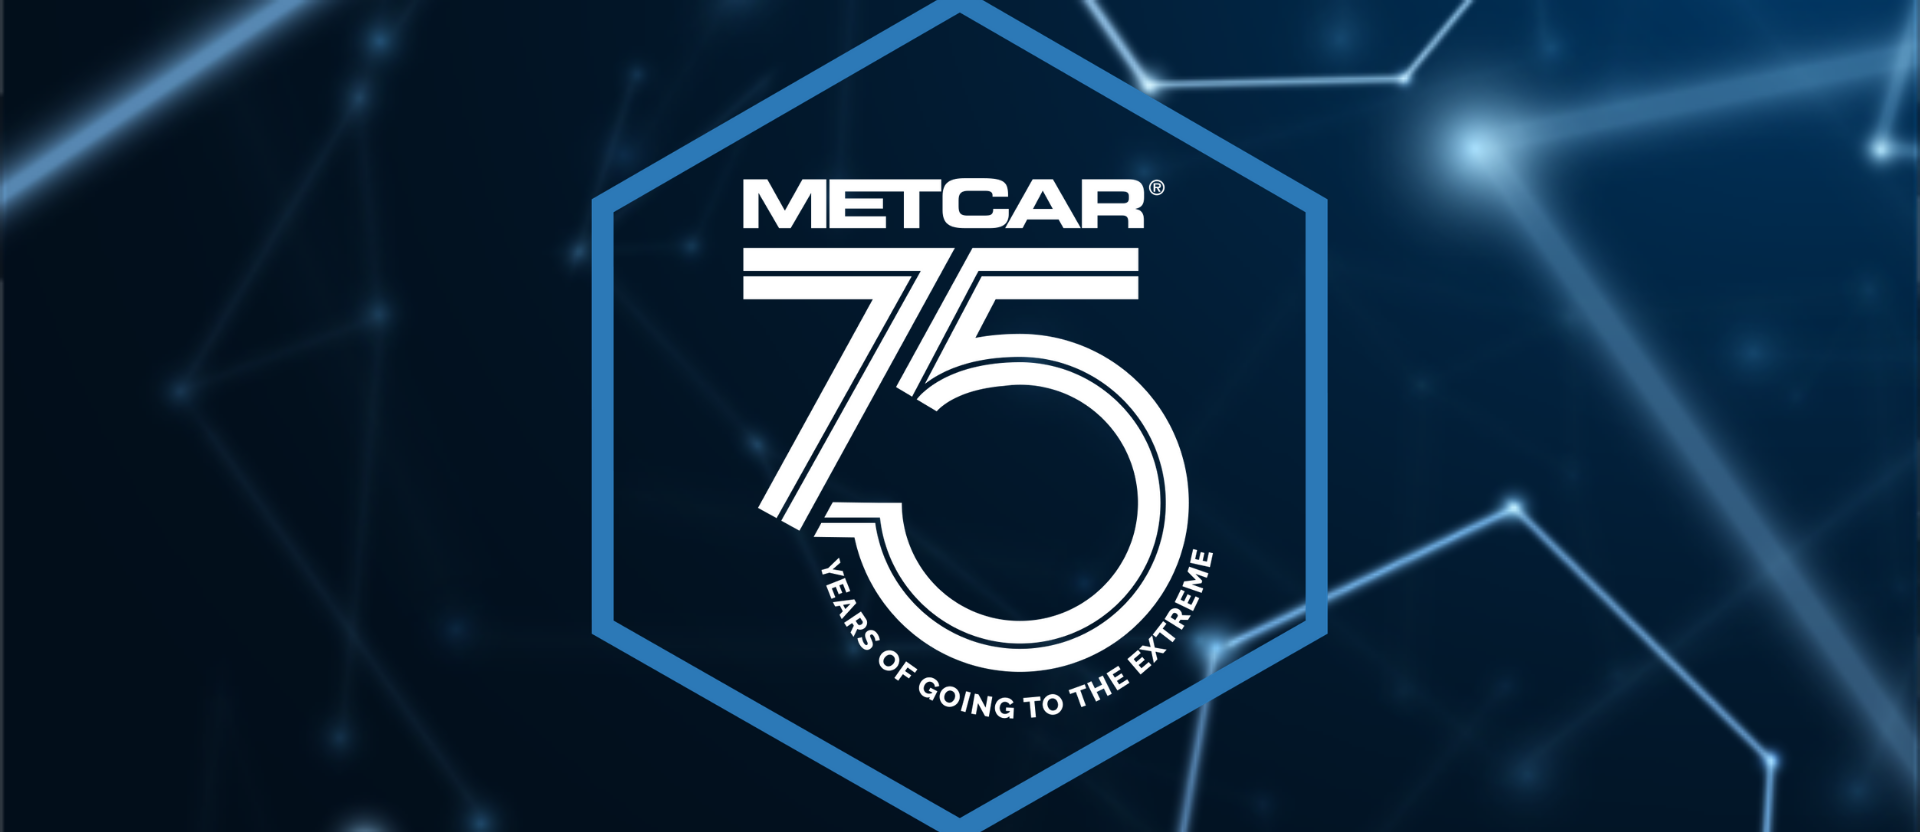 Metcar Marks 75 Years of Going to the Extreme | Carbon Graphite Manufacturing Experts